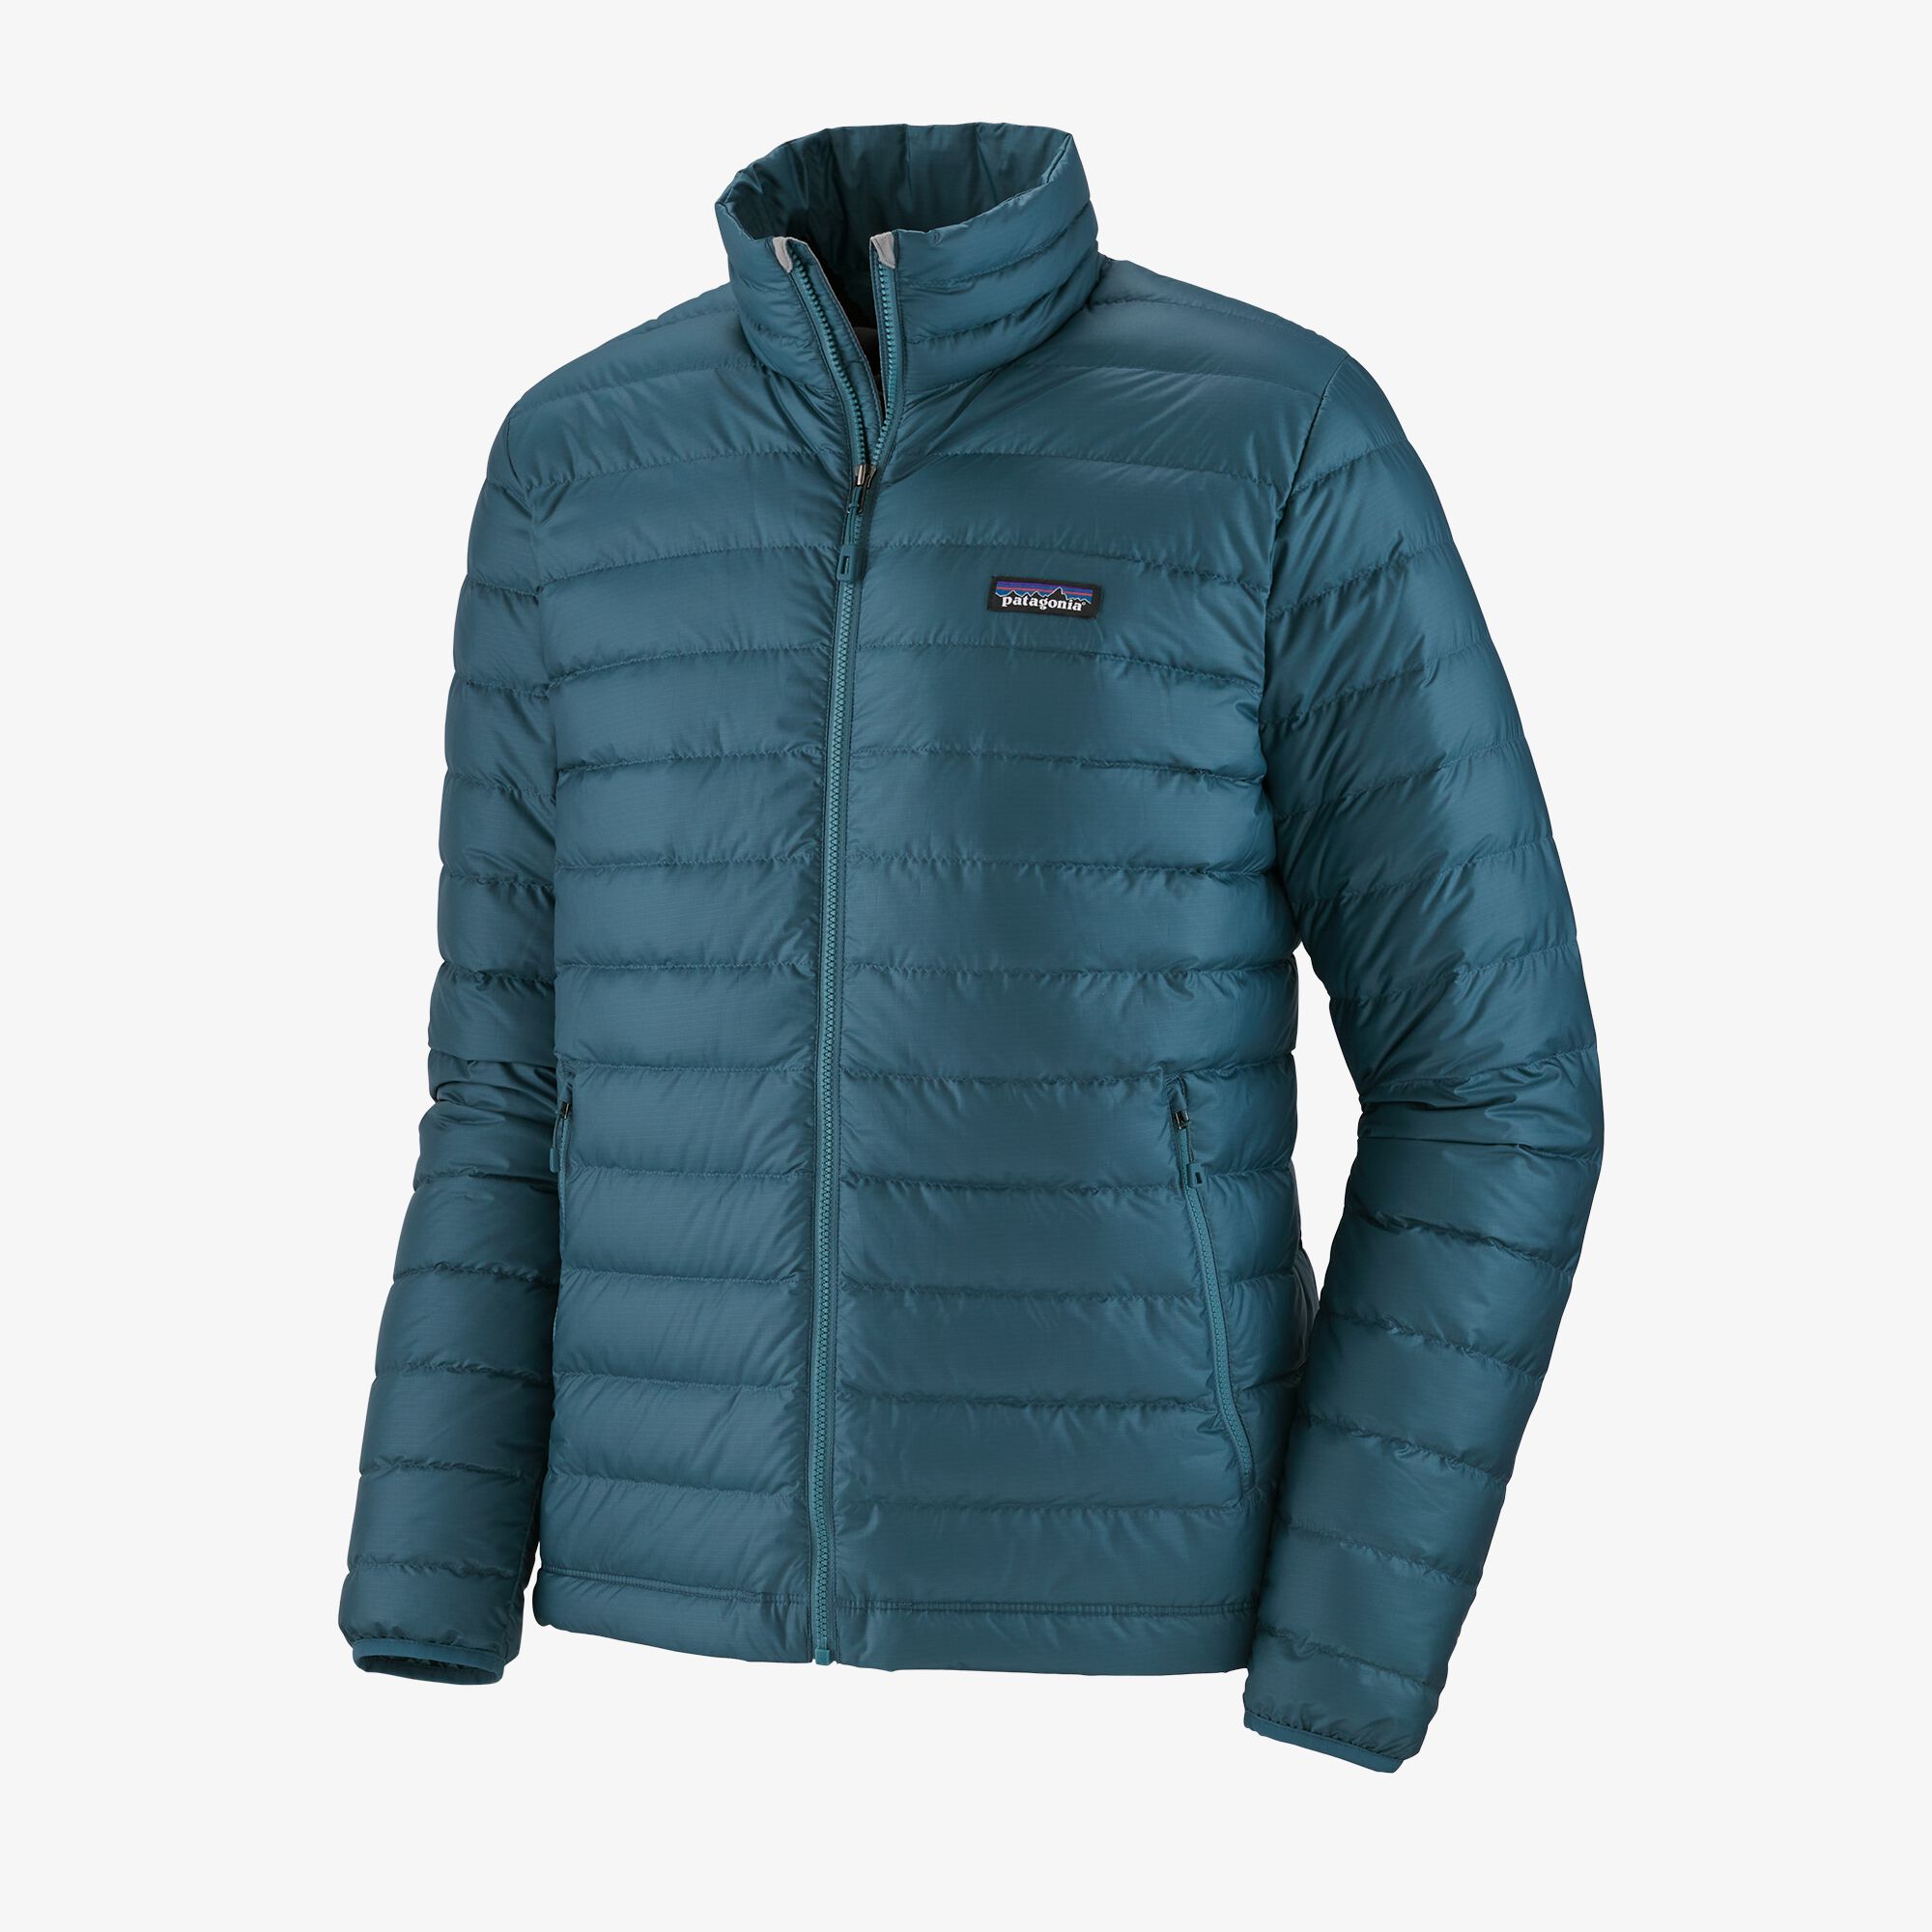 Patagonia Men's Down Sweater Jacket - Ethical down/Recycled polyester, Abalone Blue / L